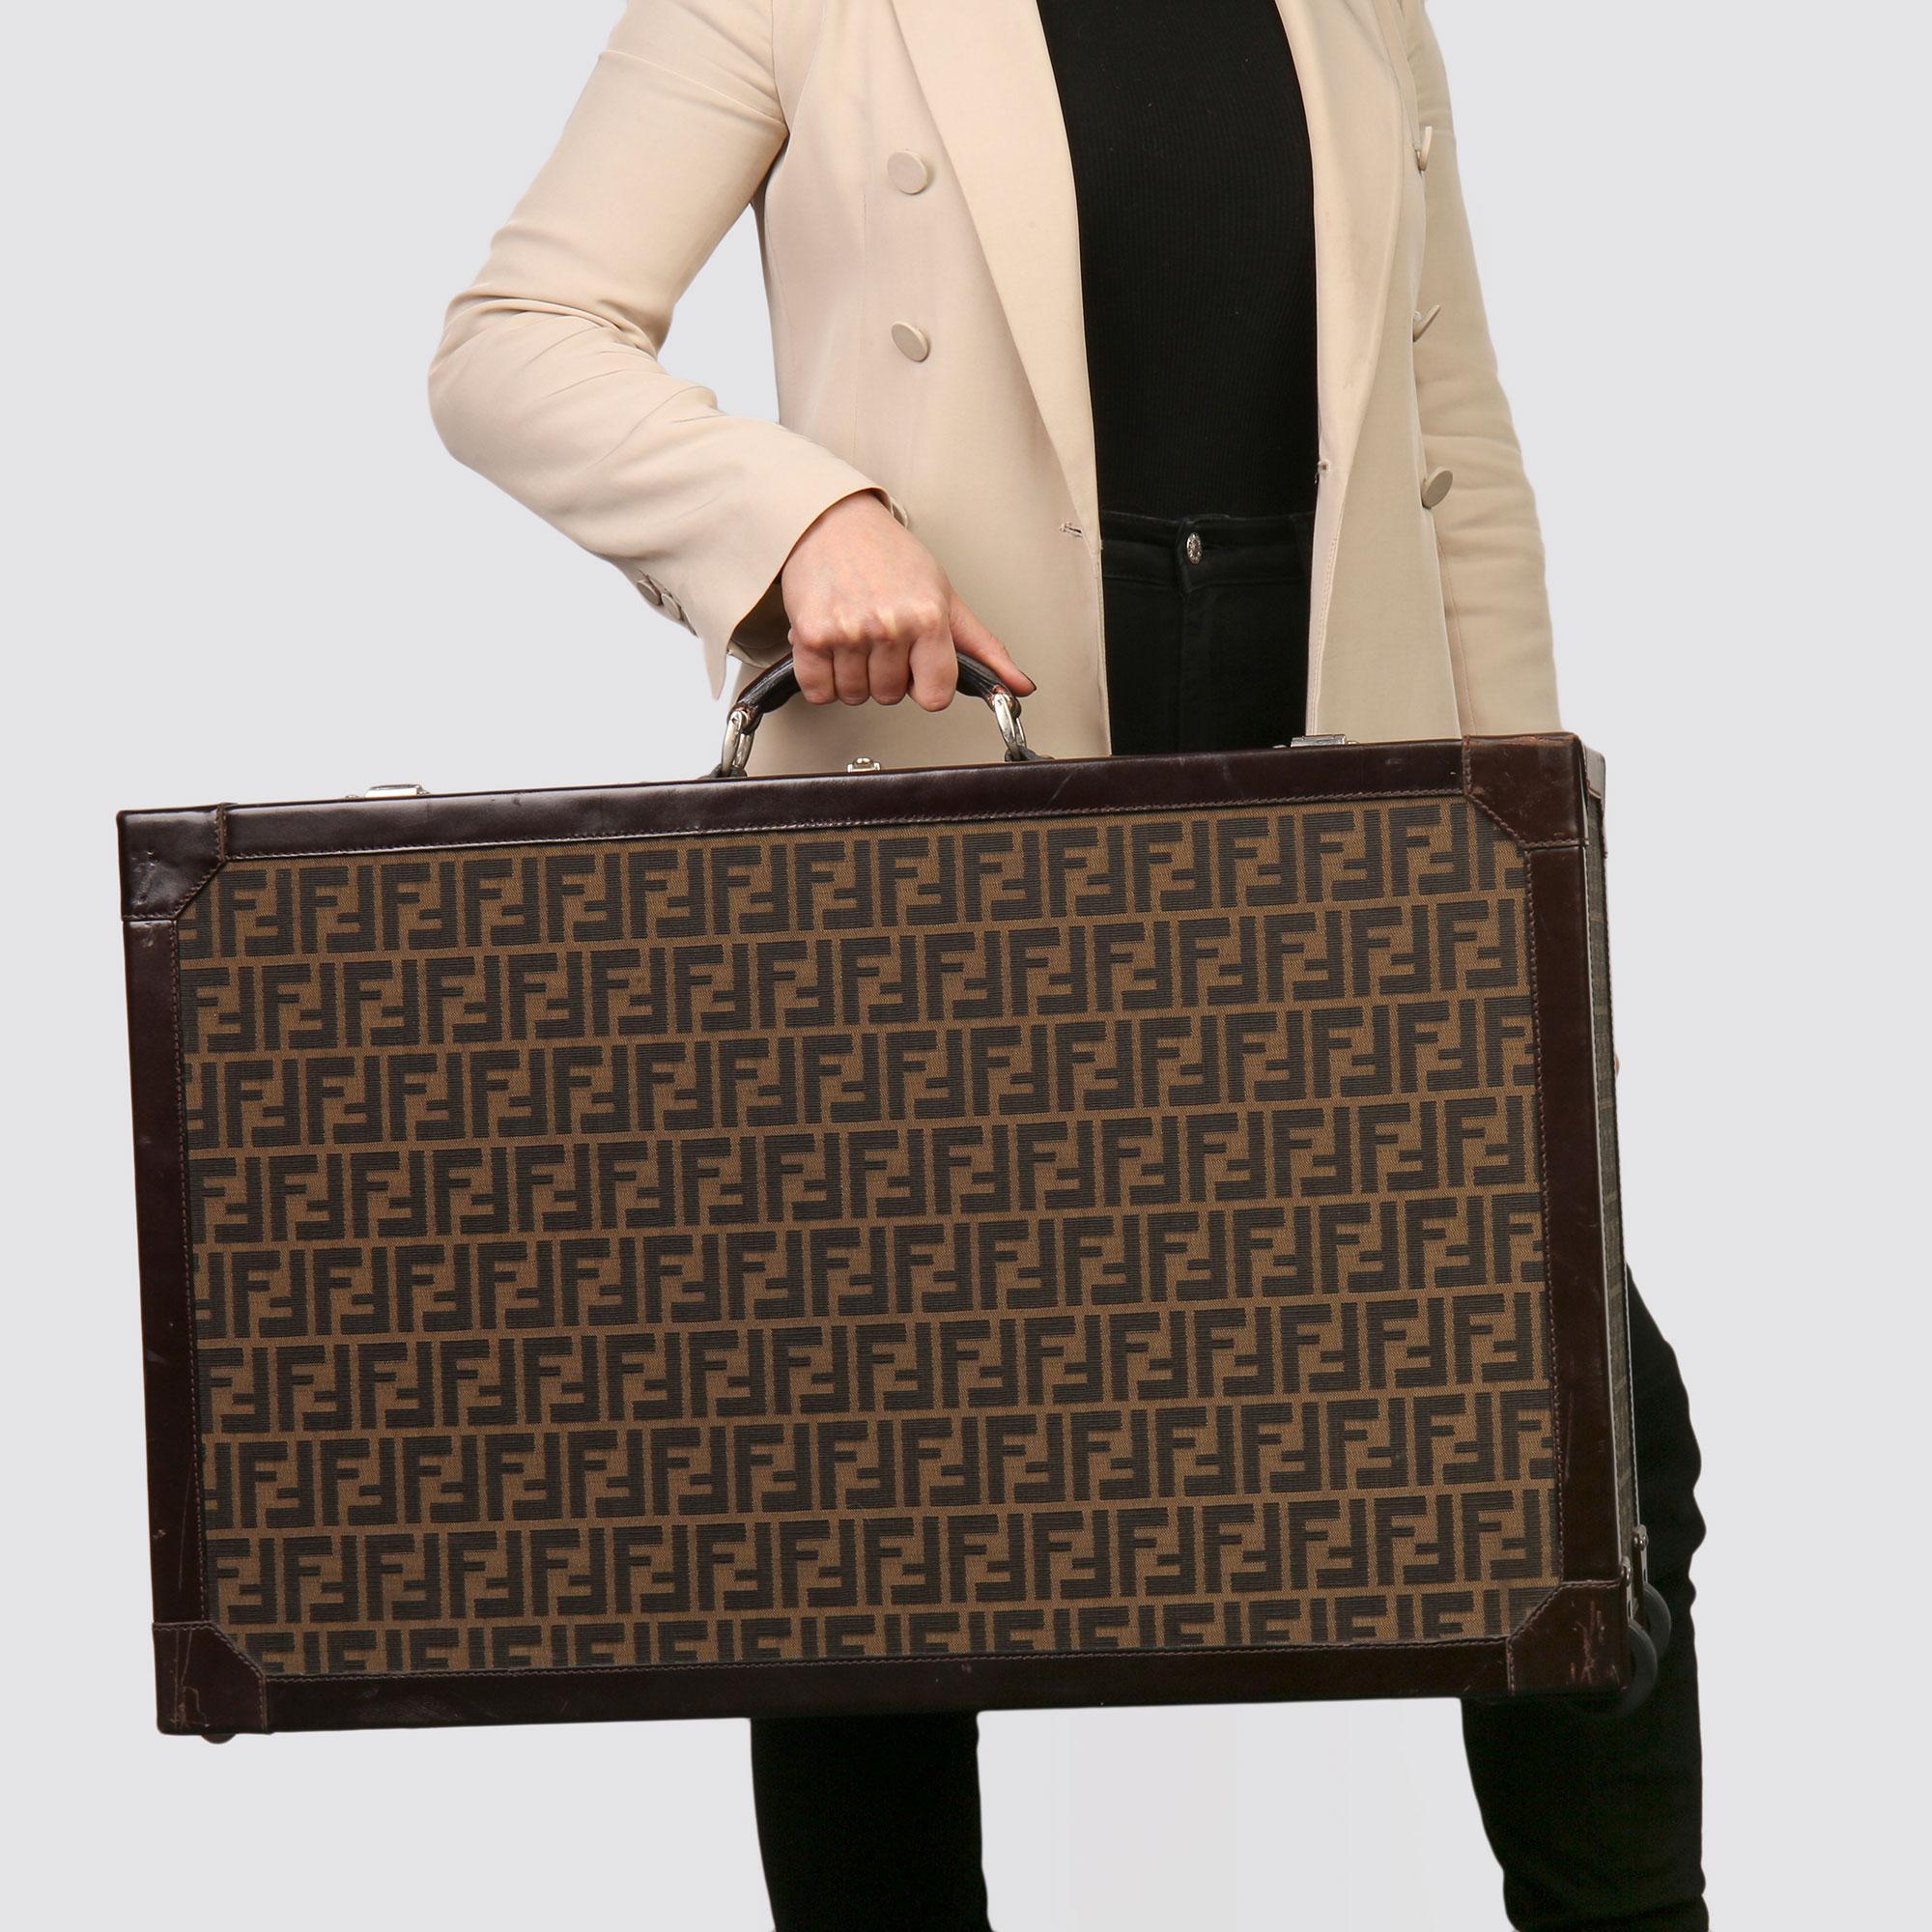 FENDI
Brown Zucca Monogram Canvas Rolling Trunk, Originally Owned by Karl Lagerfeld

Xupes Reference: HB3270
Age (Circa): 2004
Accompanied By: Luggage Tag
Gender: Unisex
Type: Travel

Colour: Brown
Hardware: Ruthenium
Material(s): Canvas & Calfskin